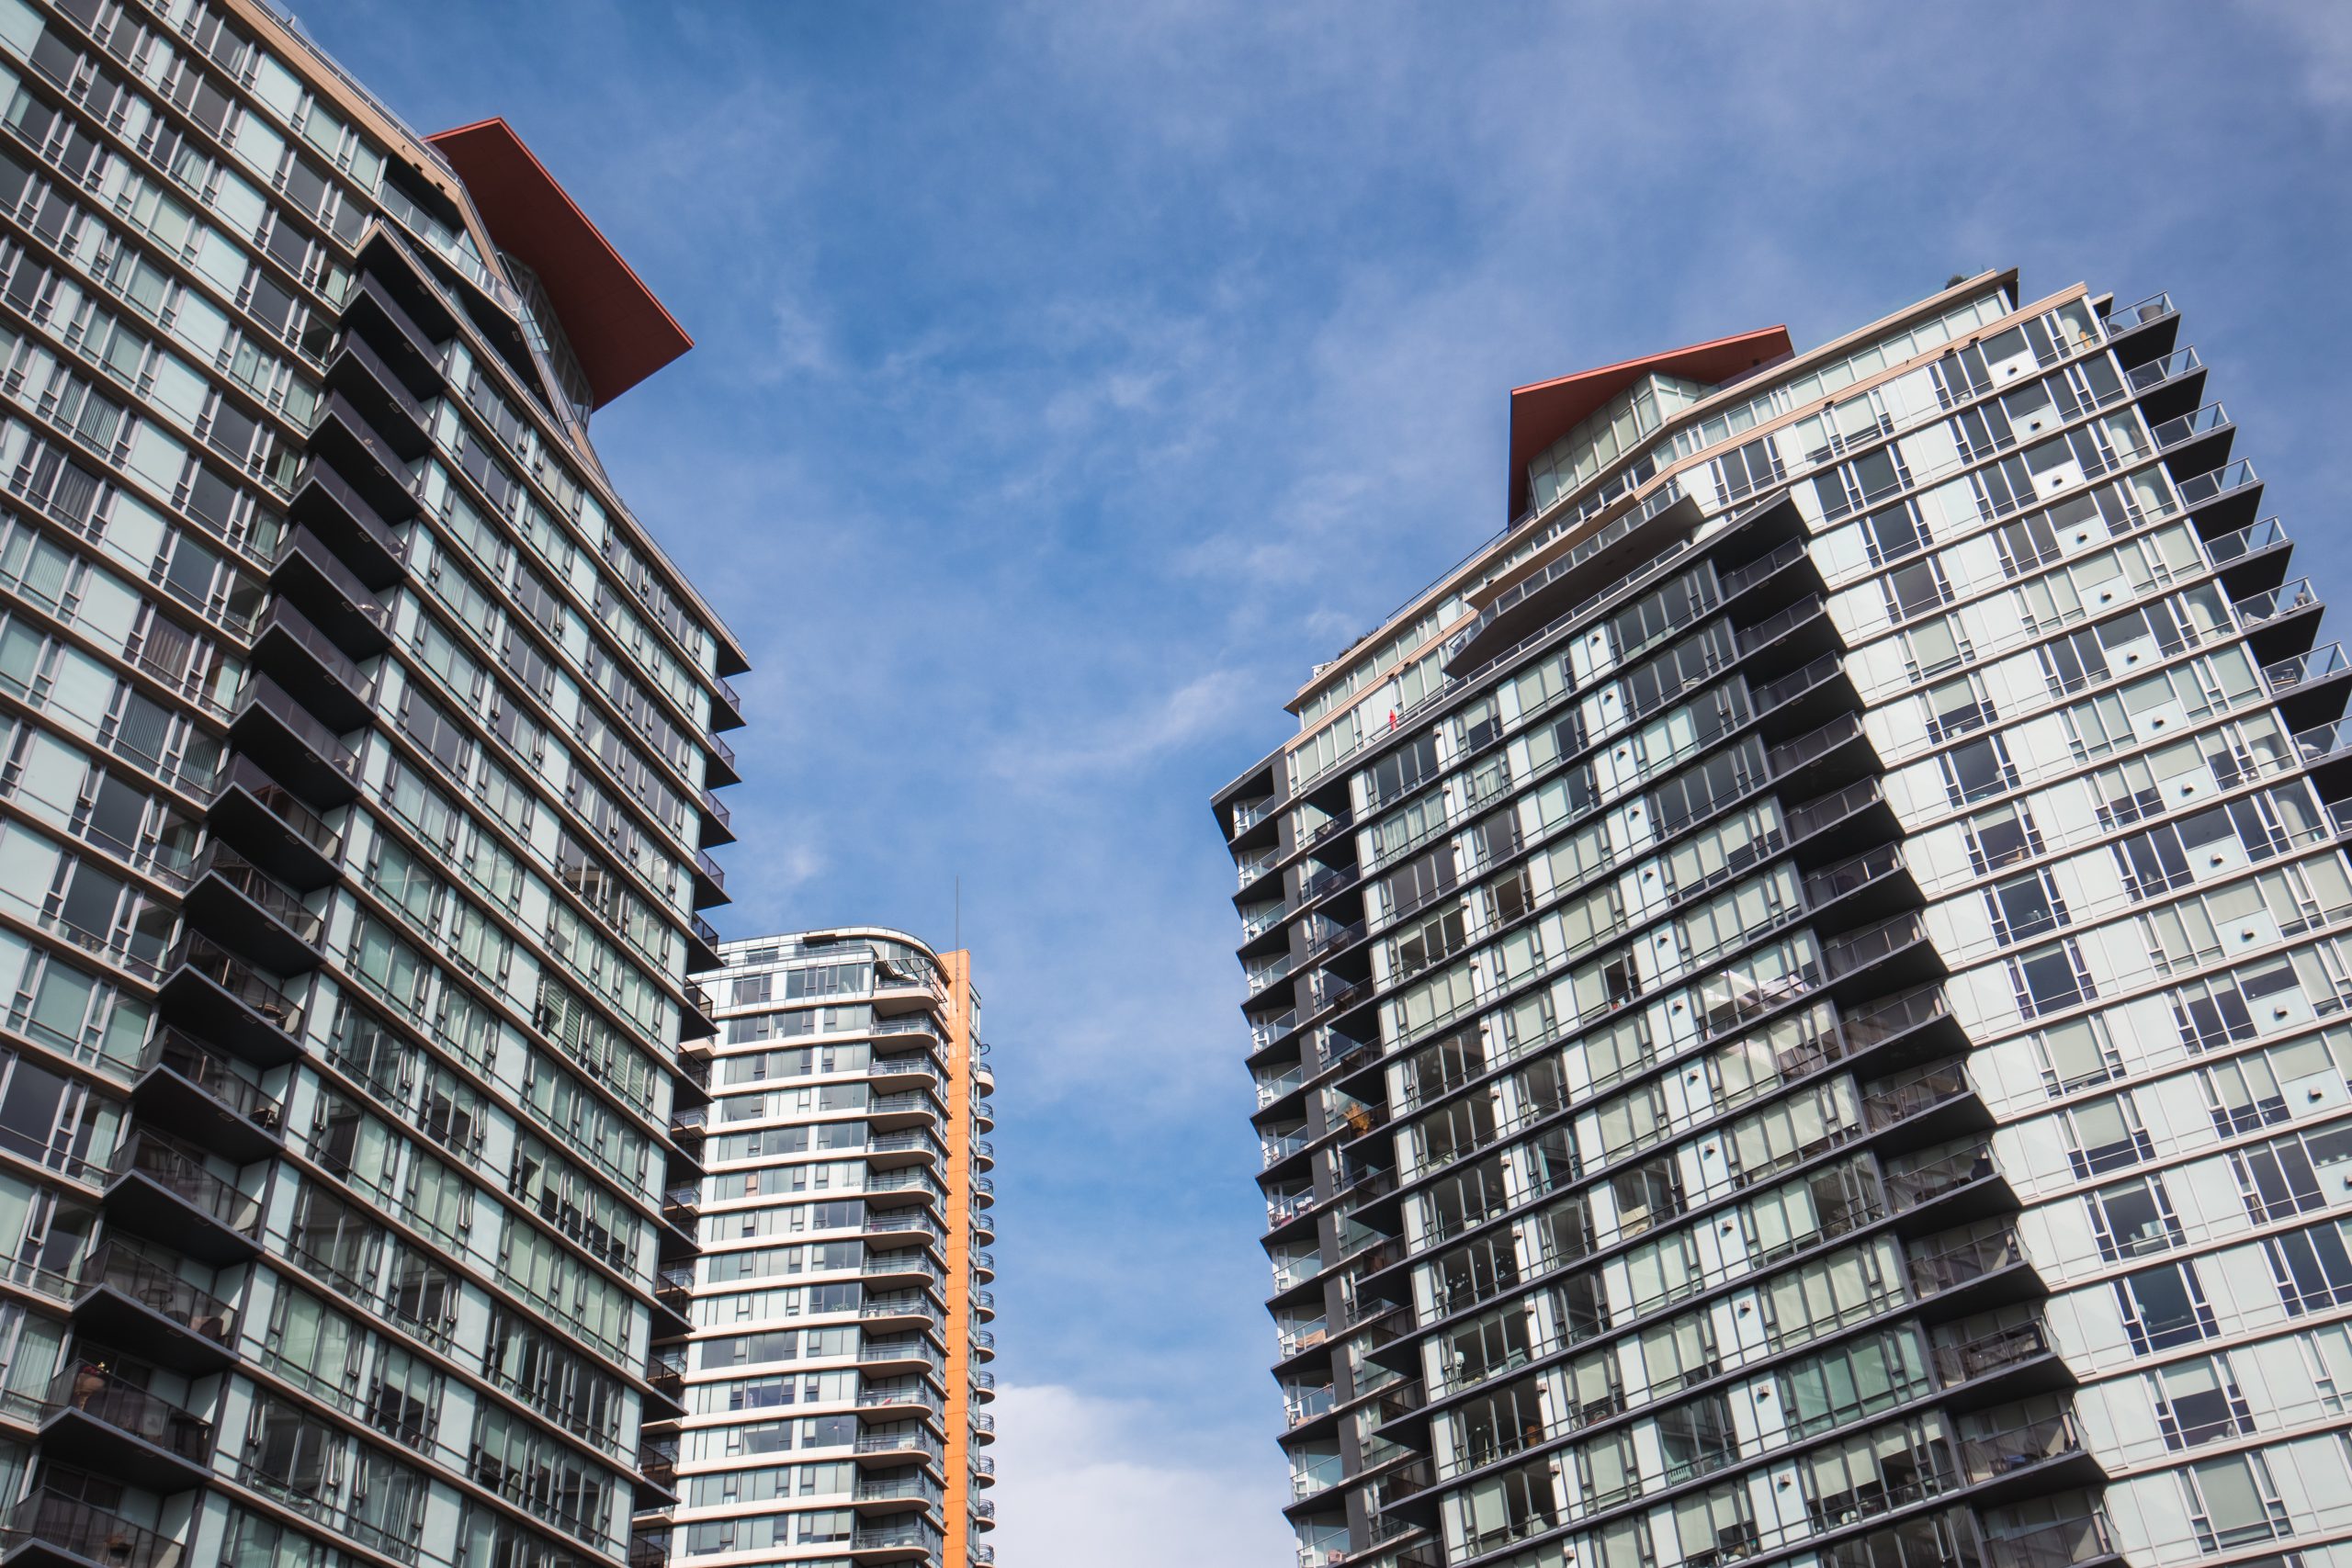 THE NATIONAL HOUSING ACCORD: A MULTI-SECTOR APPROACH TO ENDING CANADA’S RENTAL HOUSING CRISIS